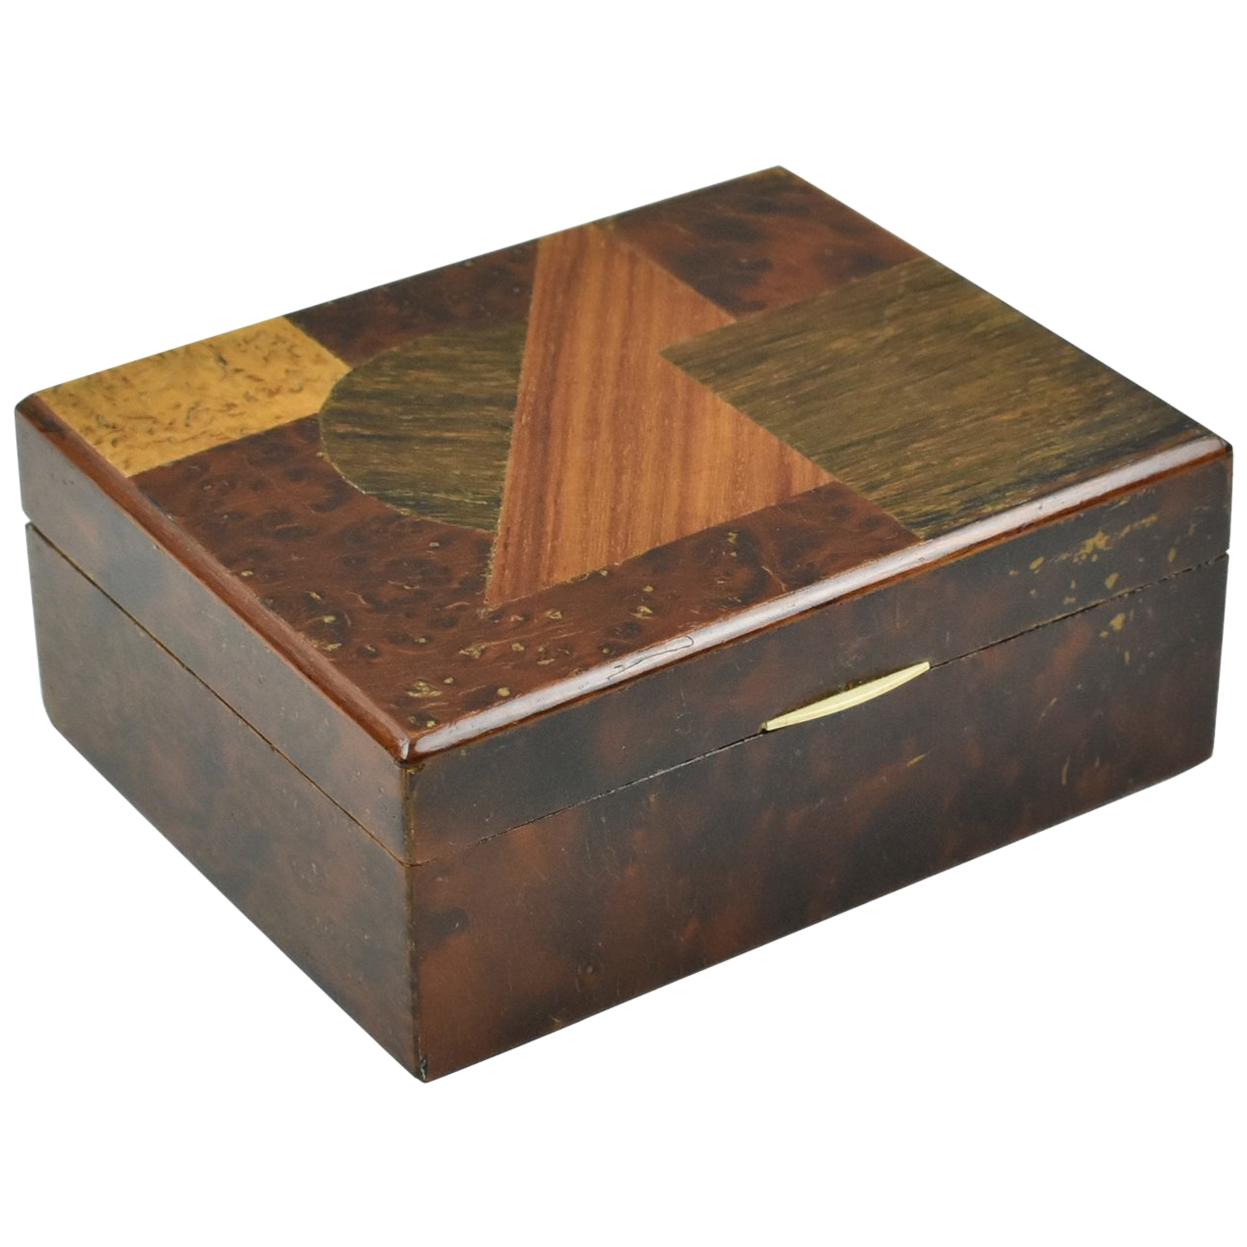 Art Deco Modernist Burl Wood Box with Wooden Marquetry